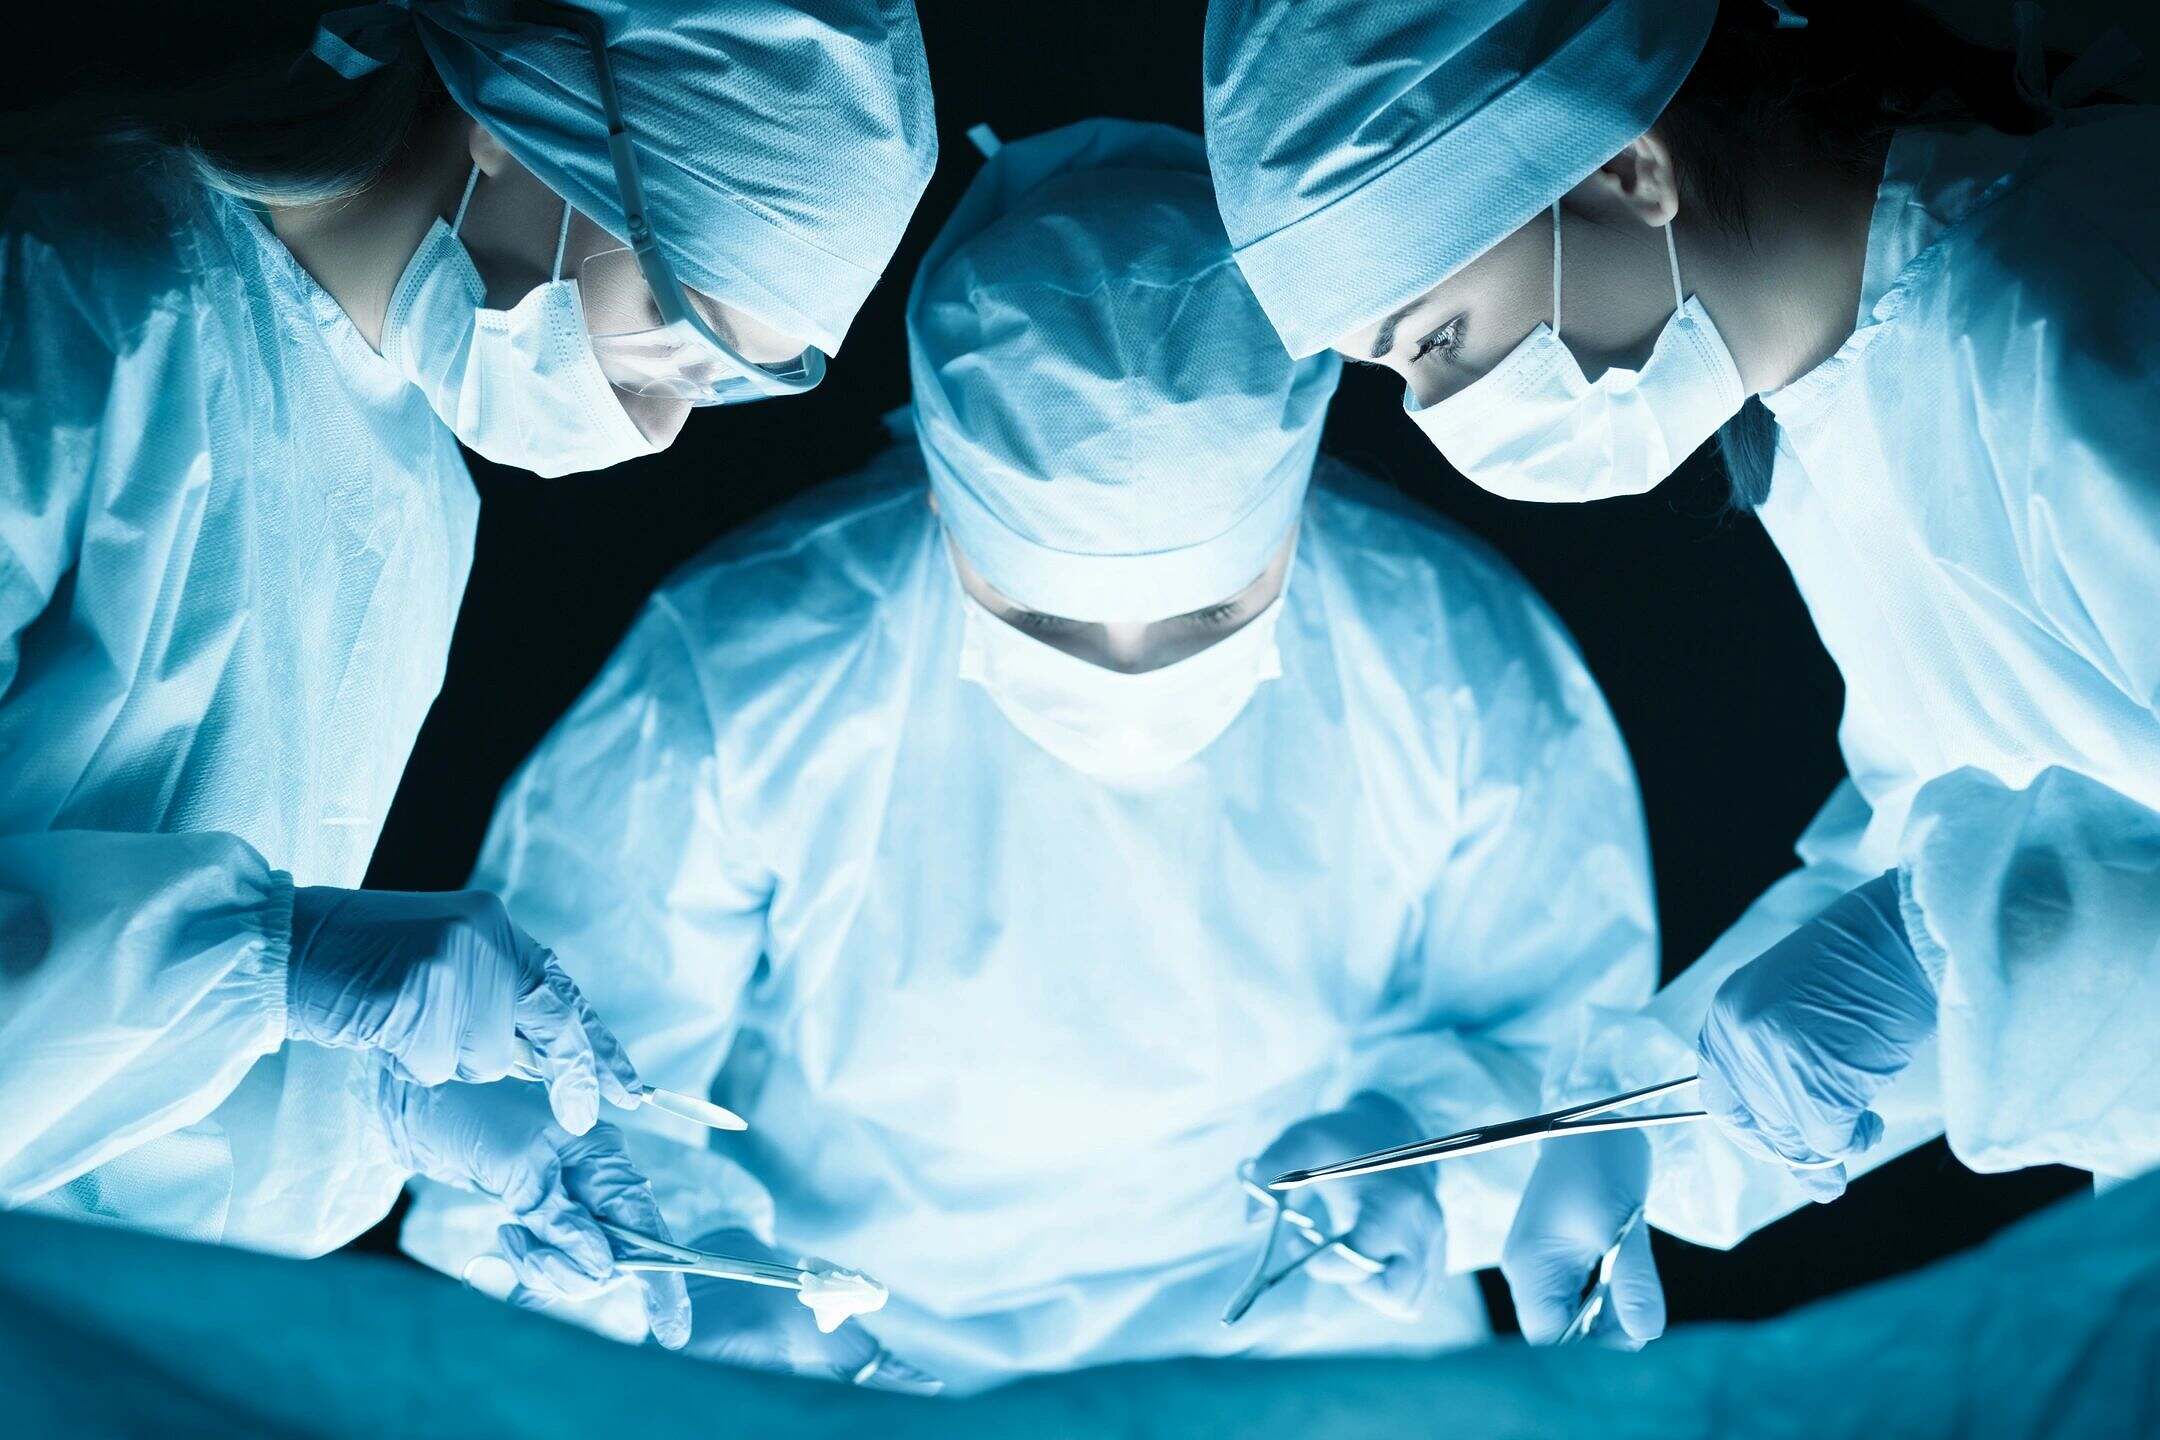 surgery during a pandemic